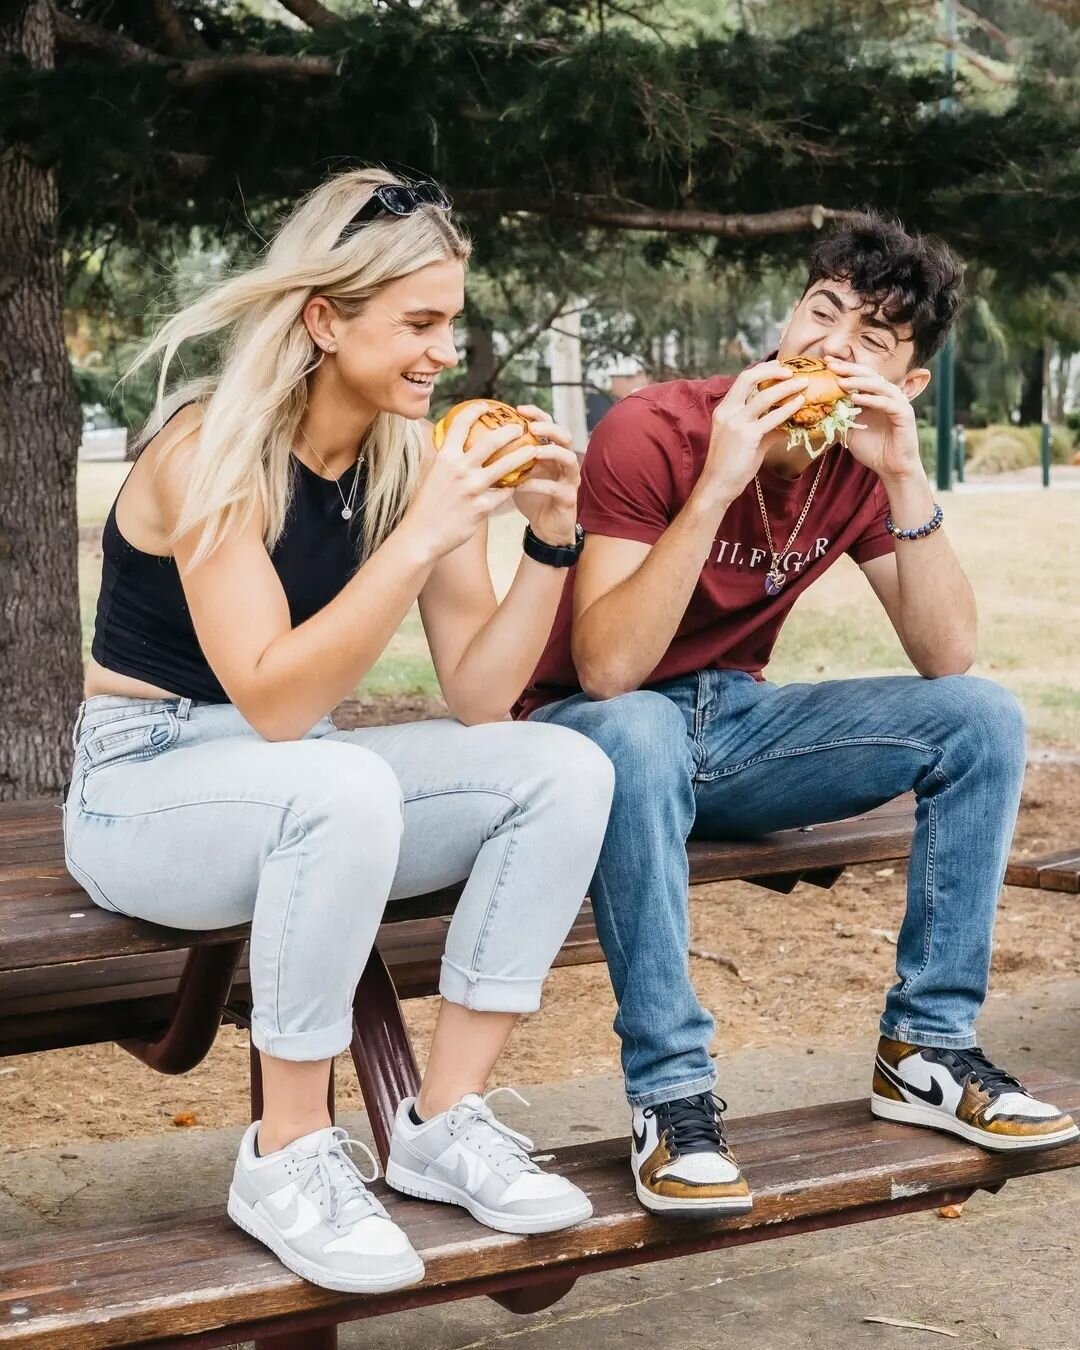 Burgers with Bae&nbsp;🍔😍 Anywhere, Anytime!